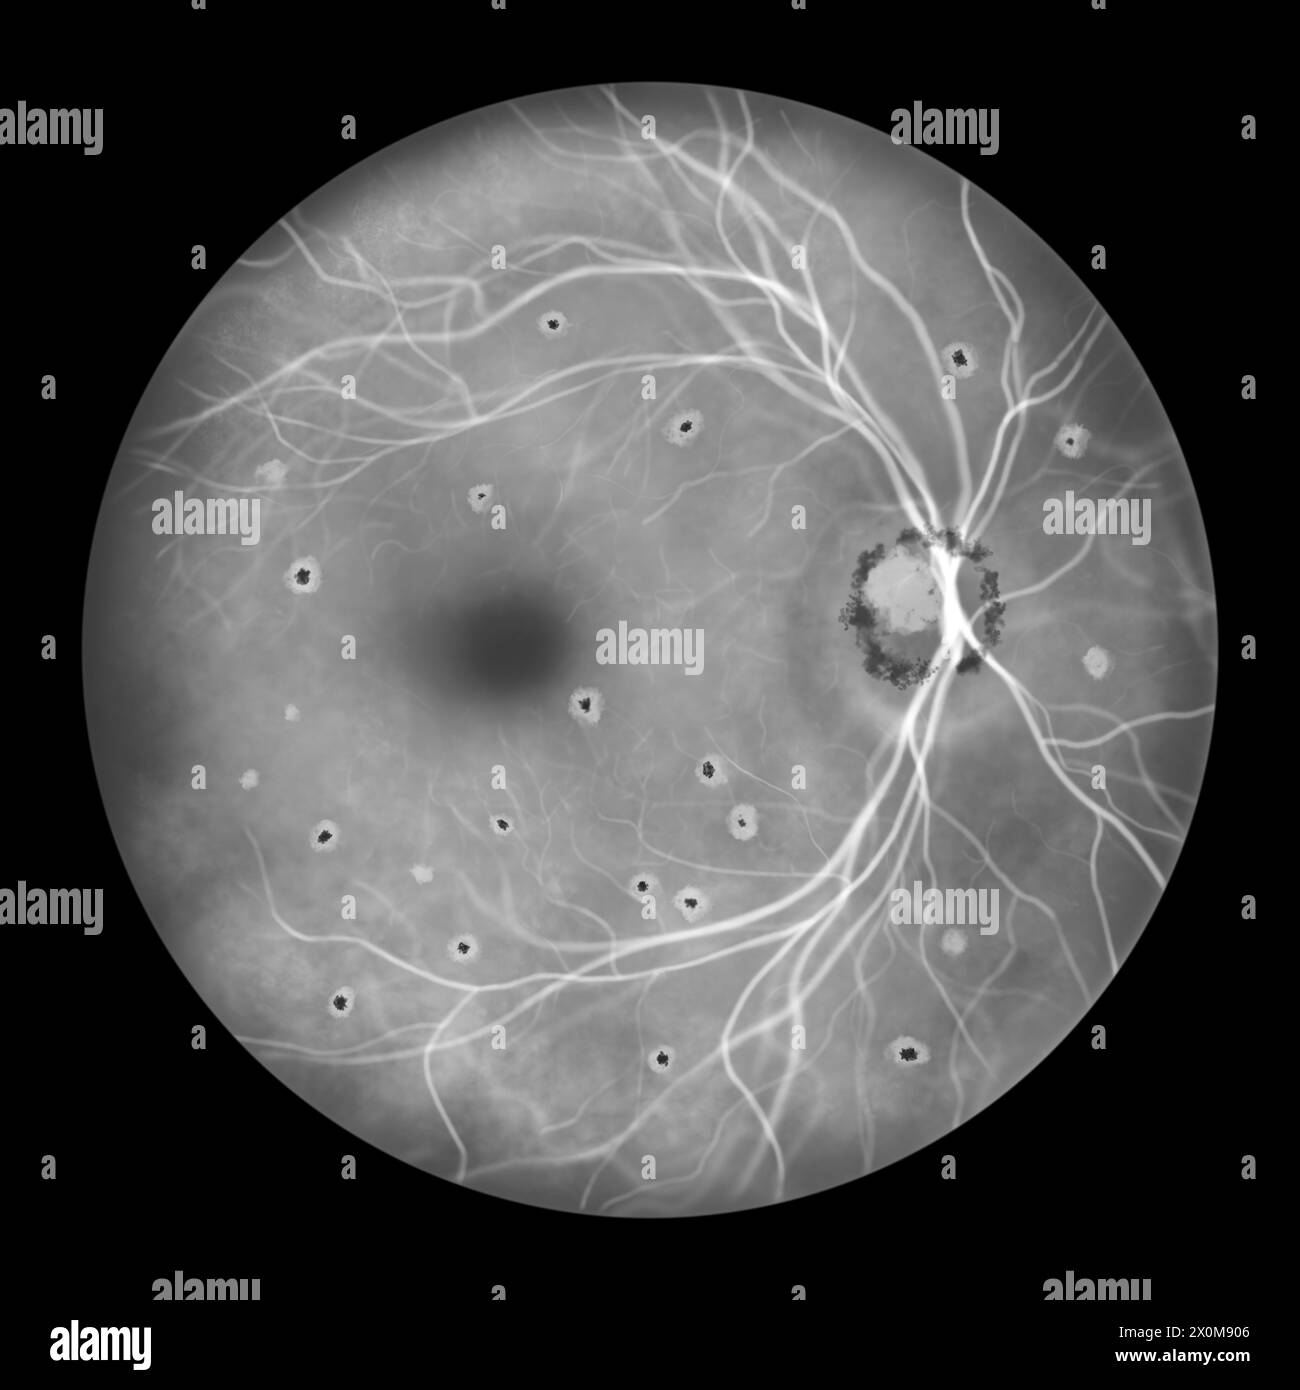 Illustration of a retina affected by presumed ocular histoplasmosis syndrome as seen in fluorescein angiography. The retina features punched-out atrophic and pigmented chorioretinal scars (histo spots) and peripapillary scarring. Stock Photo